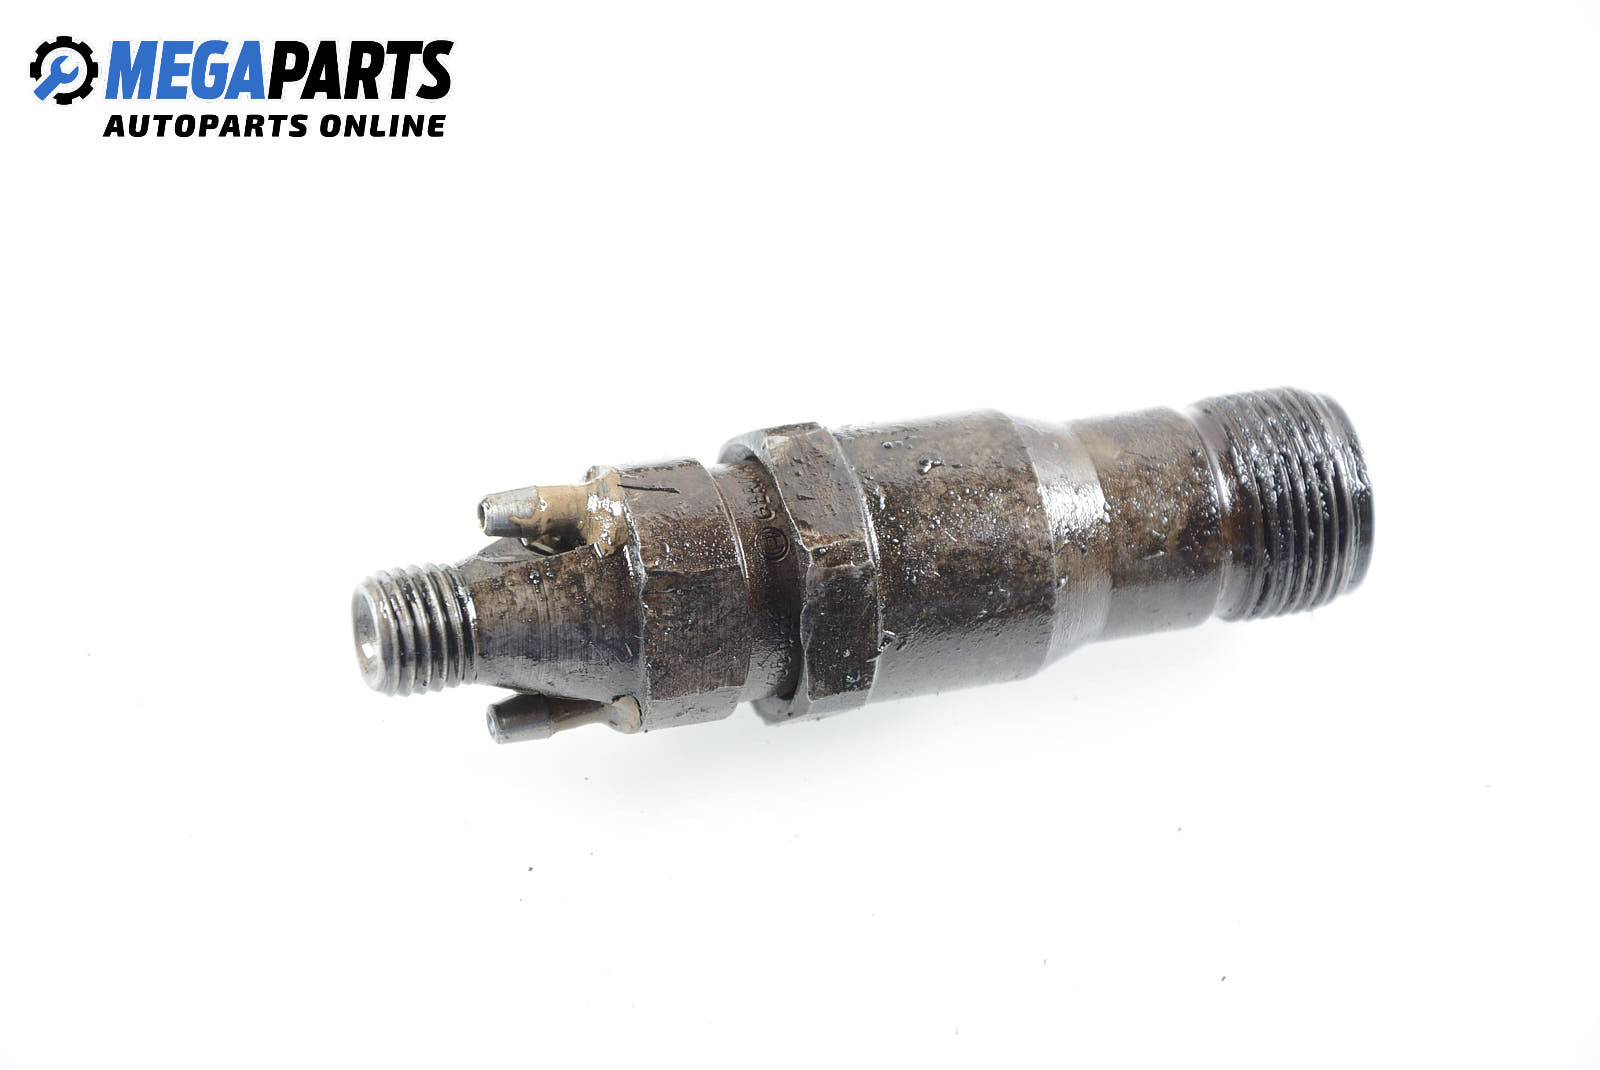 Diesel Fuel Injector For Mercedes Benz S Class 140 W V C 3 5 Td 150 Hp Sedan 5 Doors Automatic 1997 Price 7 80